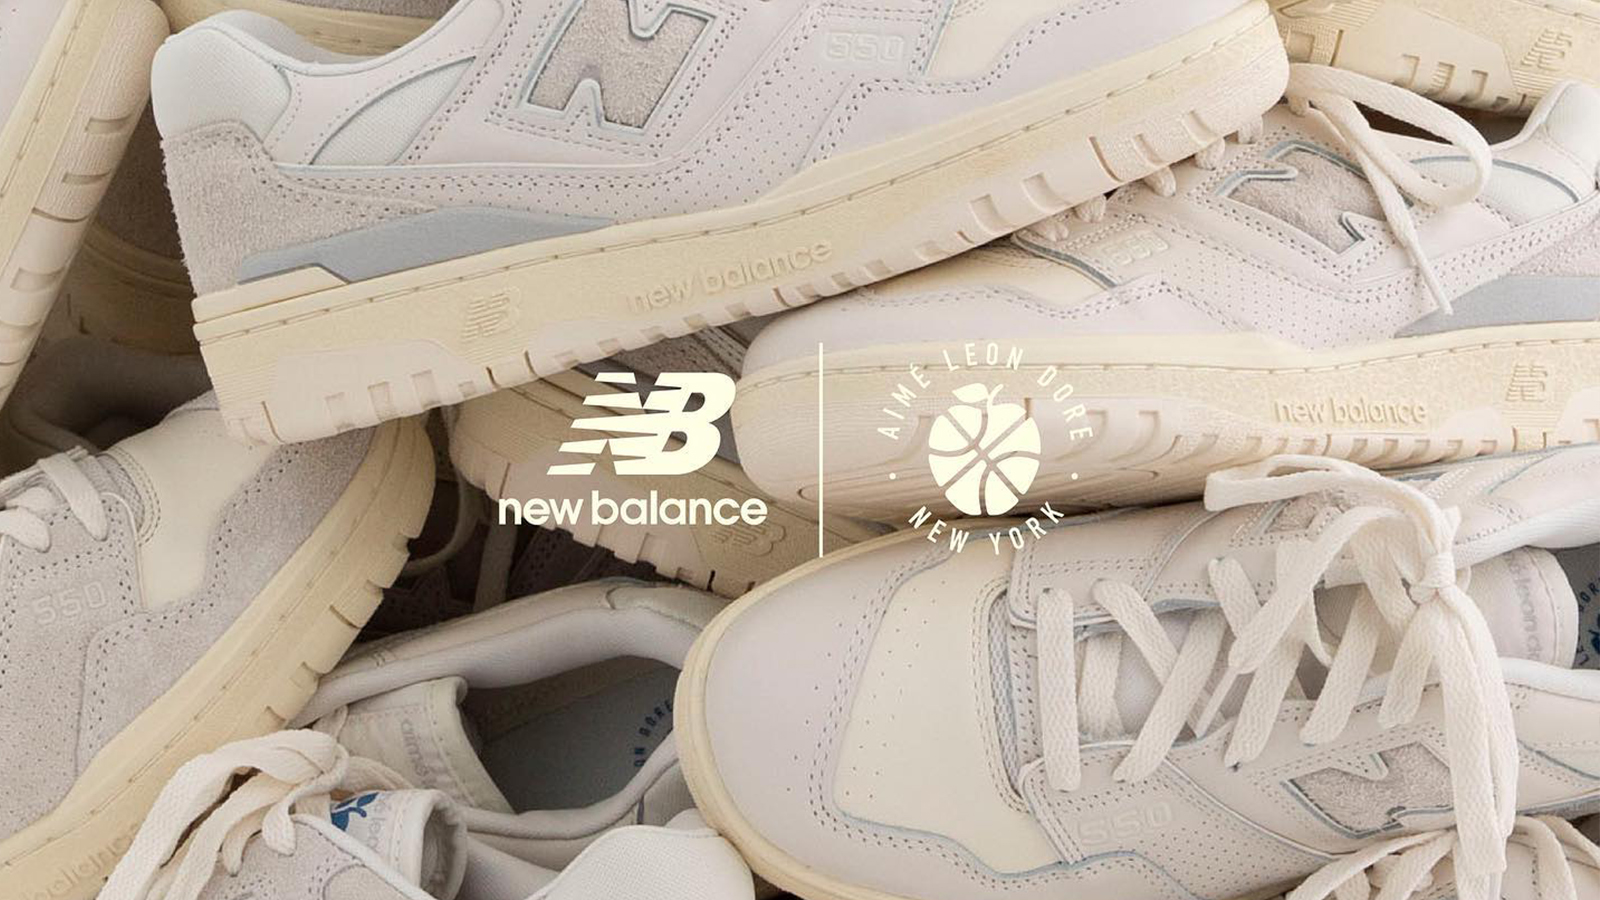 Coming Soon To Laced: All-New Aimé Leon Dore x New Balance